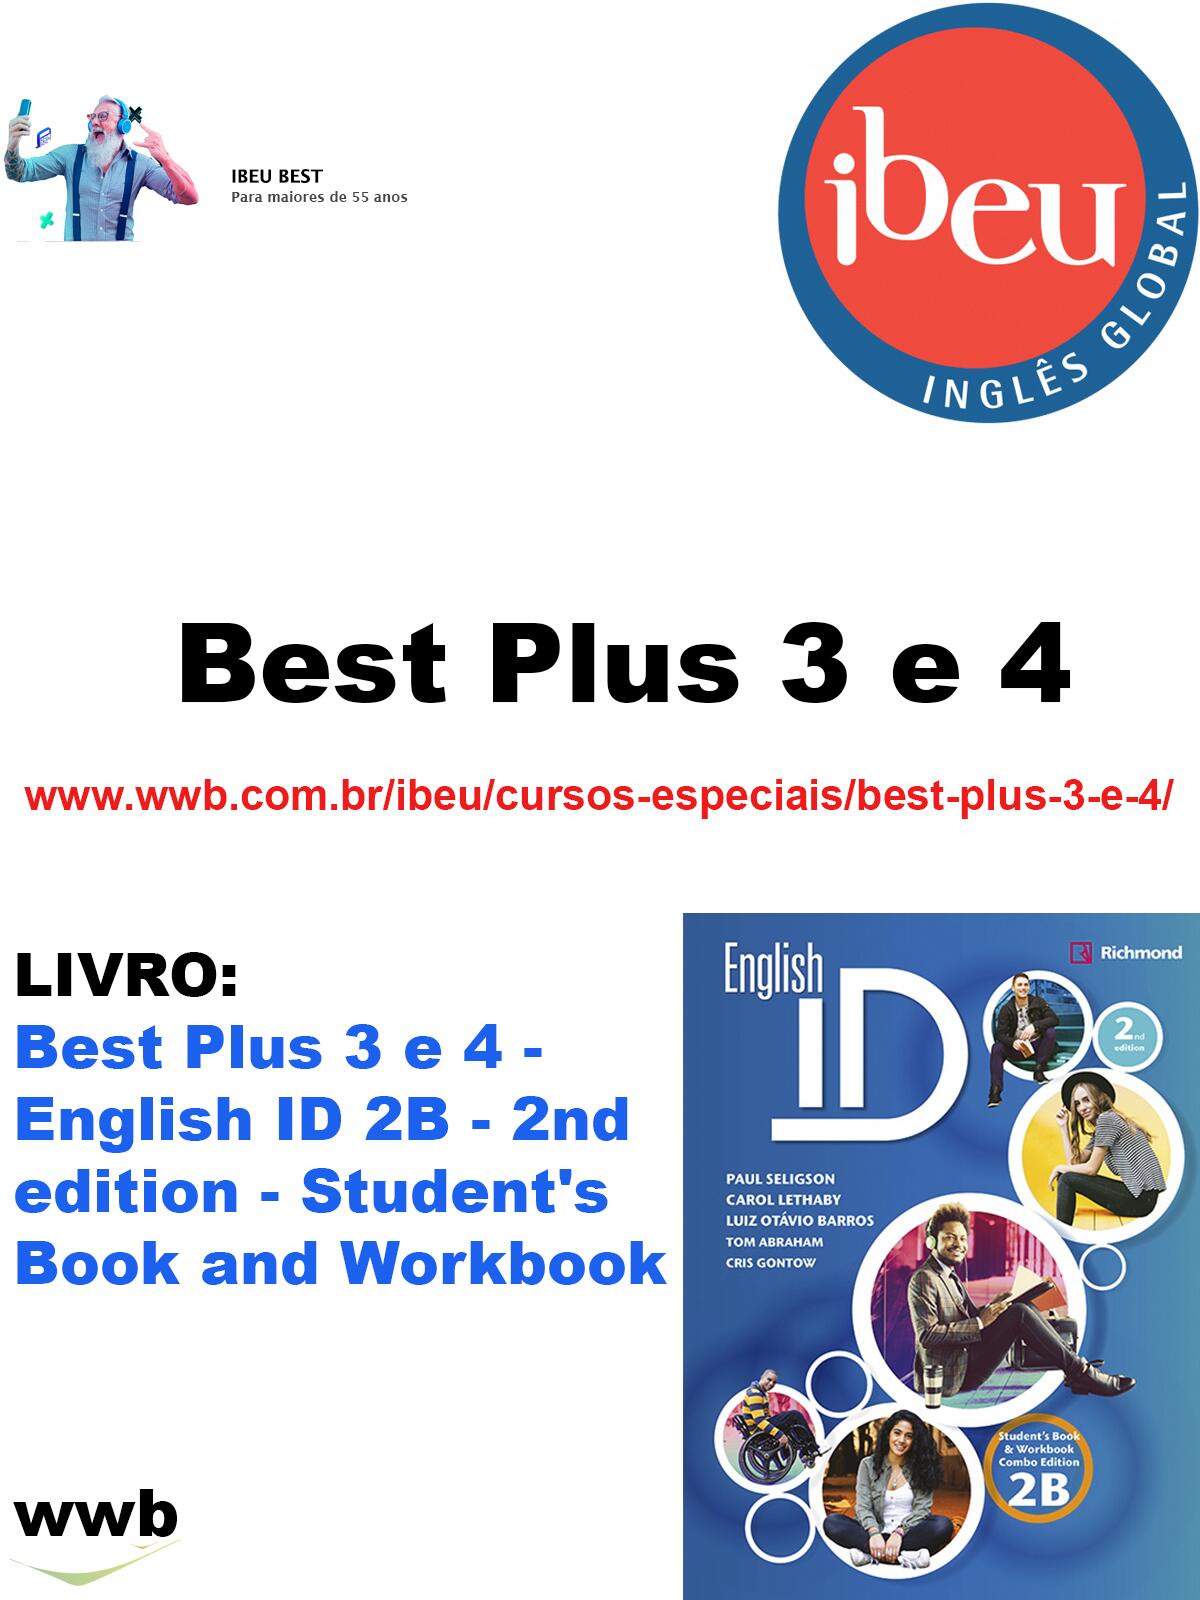 Best Plus 3 e 4 - English ID 2B - 2nd edition - Student's Book and